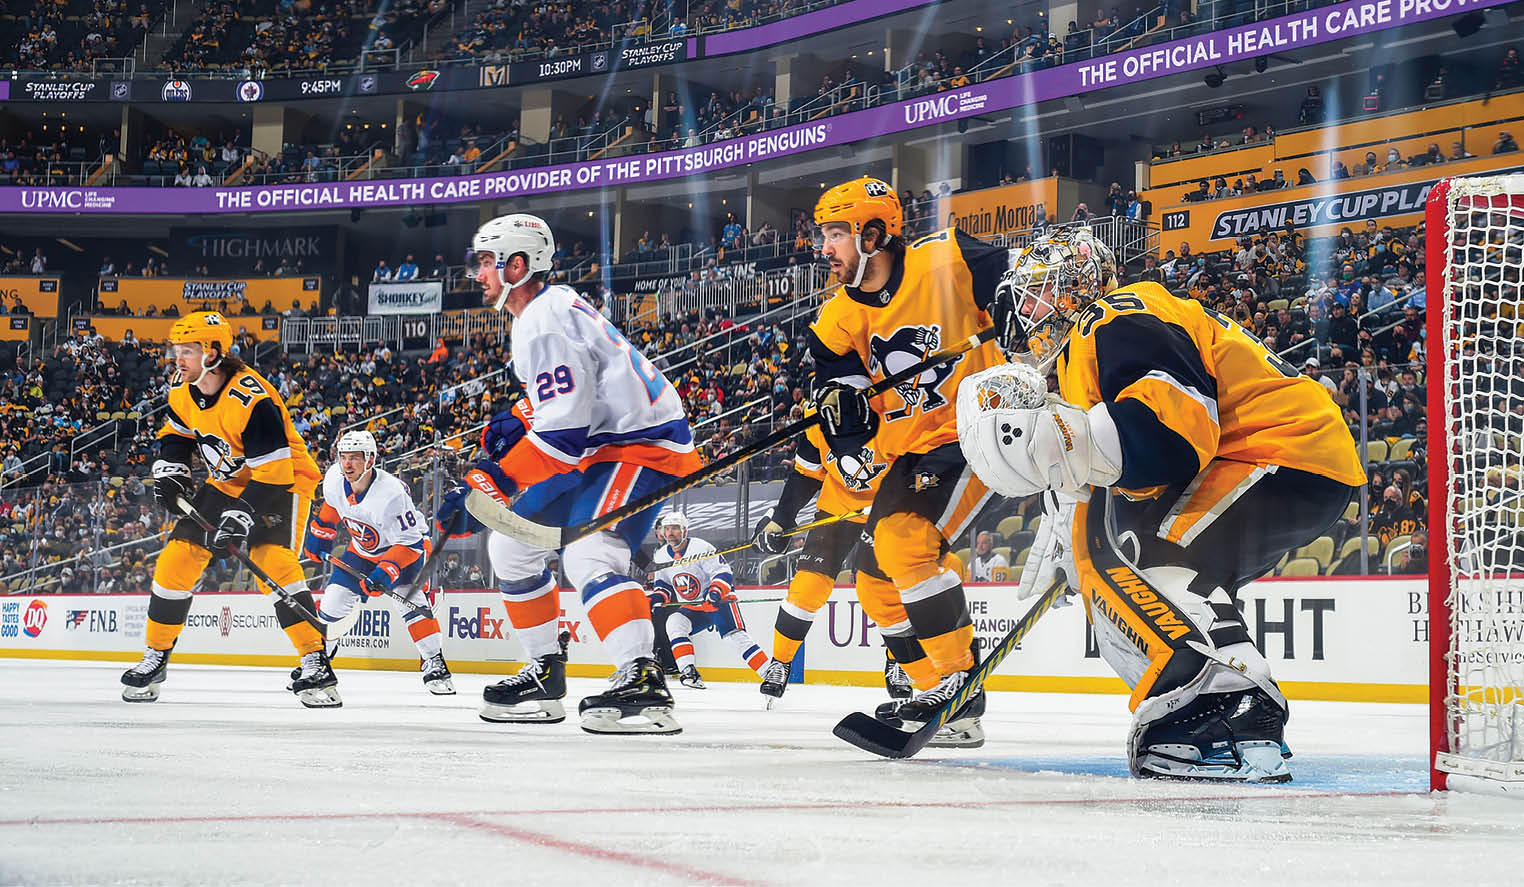 May 24, 2021 - Pittsburgh Penguins vs New York Islanders in Game Five of the Stanley Cup Playoffs at PPG Paints Arena  New York won the game 3-2 in double overtime 